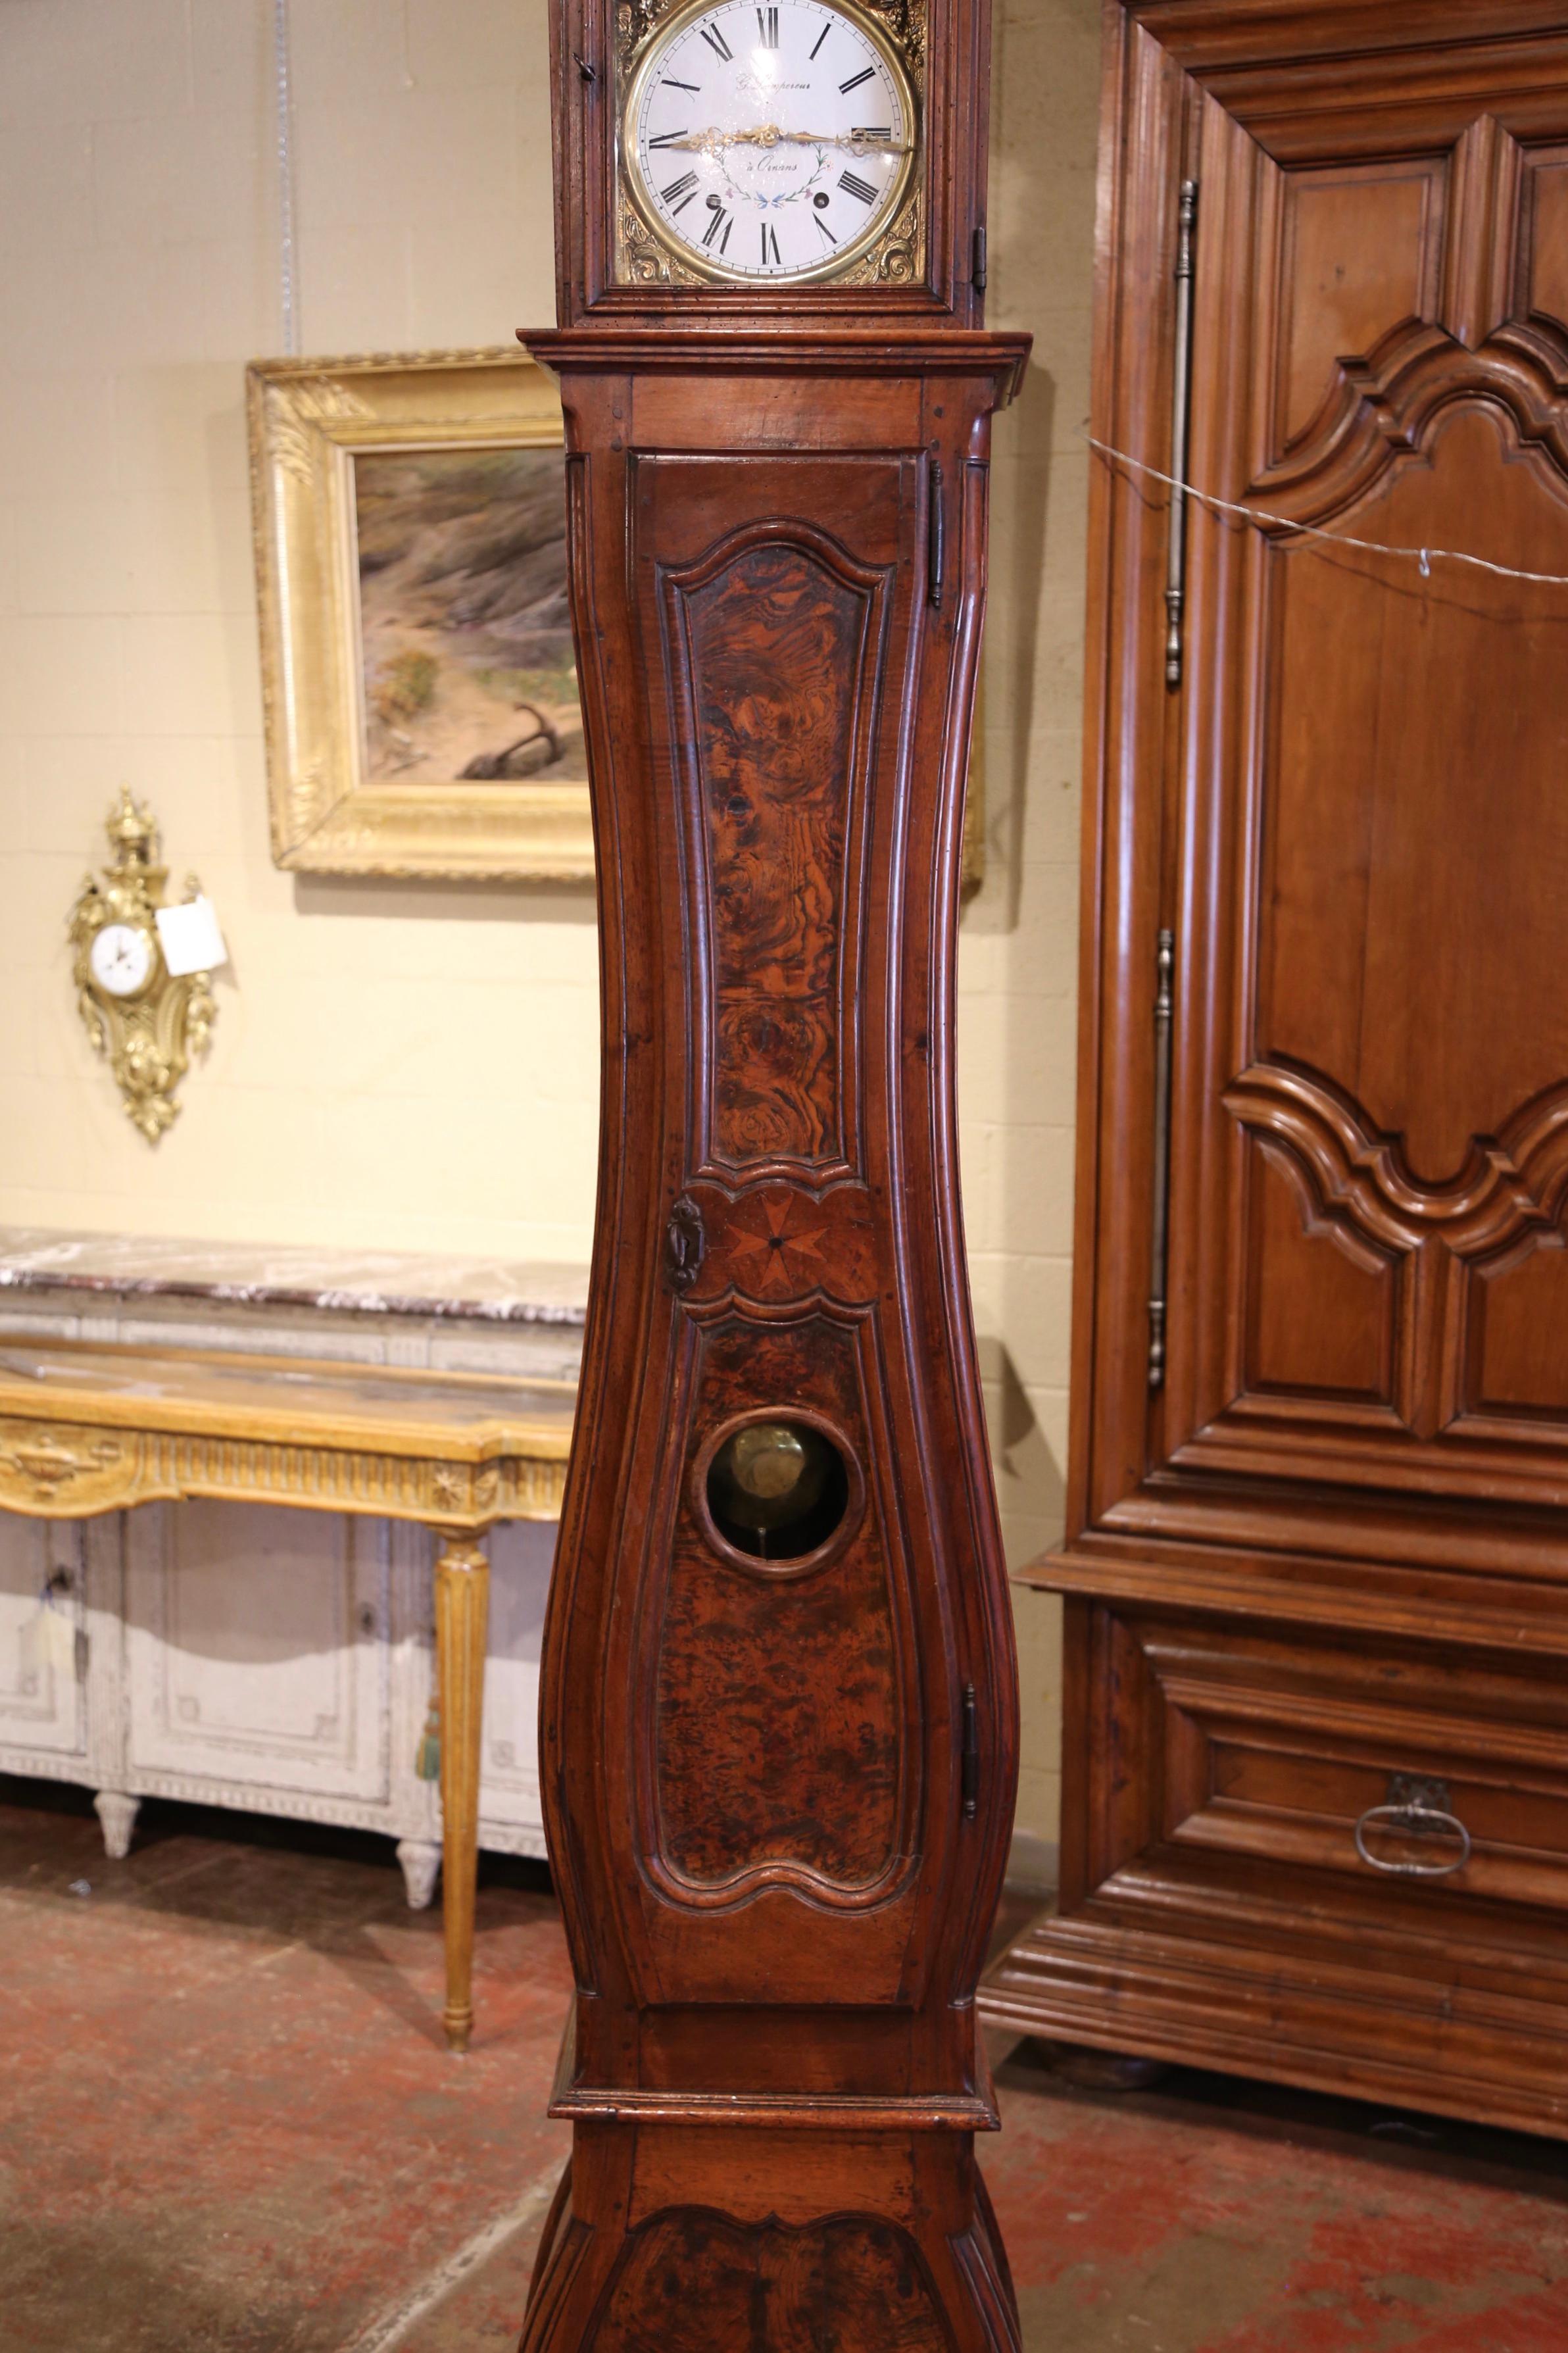 Patinated Mid-18th Century French Louis XV Carved Burl Walnut Tall Case Clock from Lyon